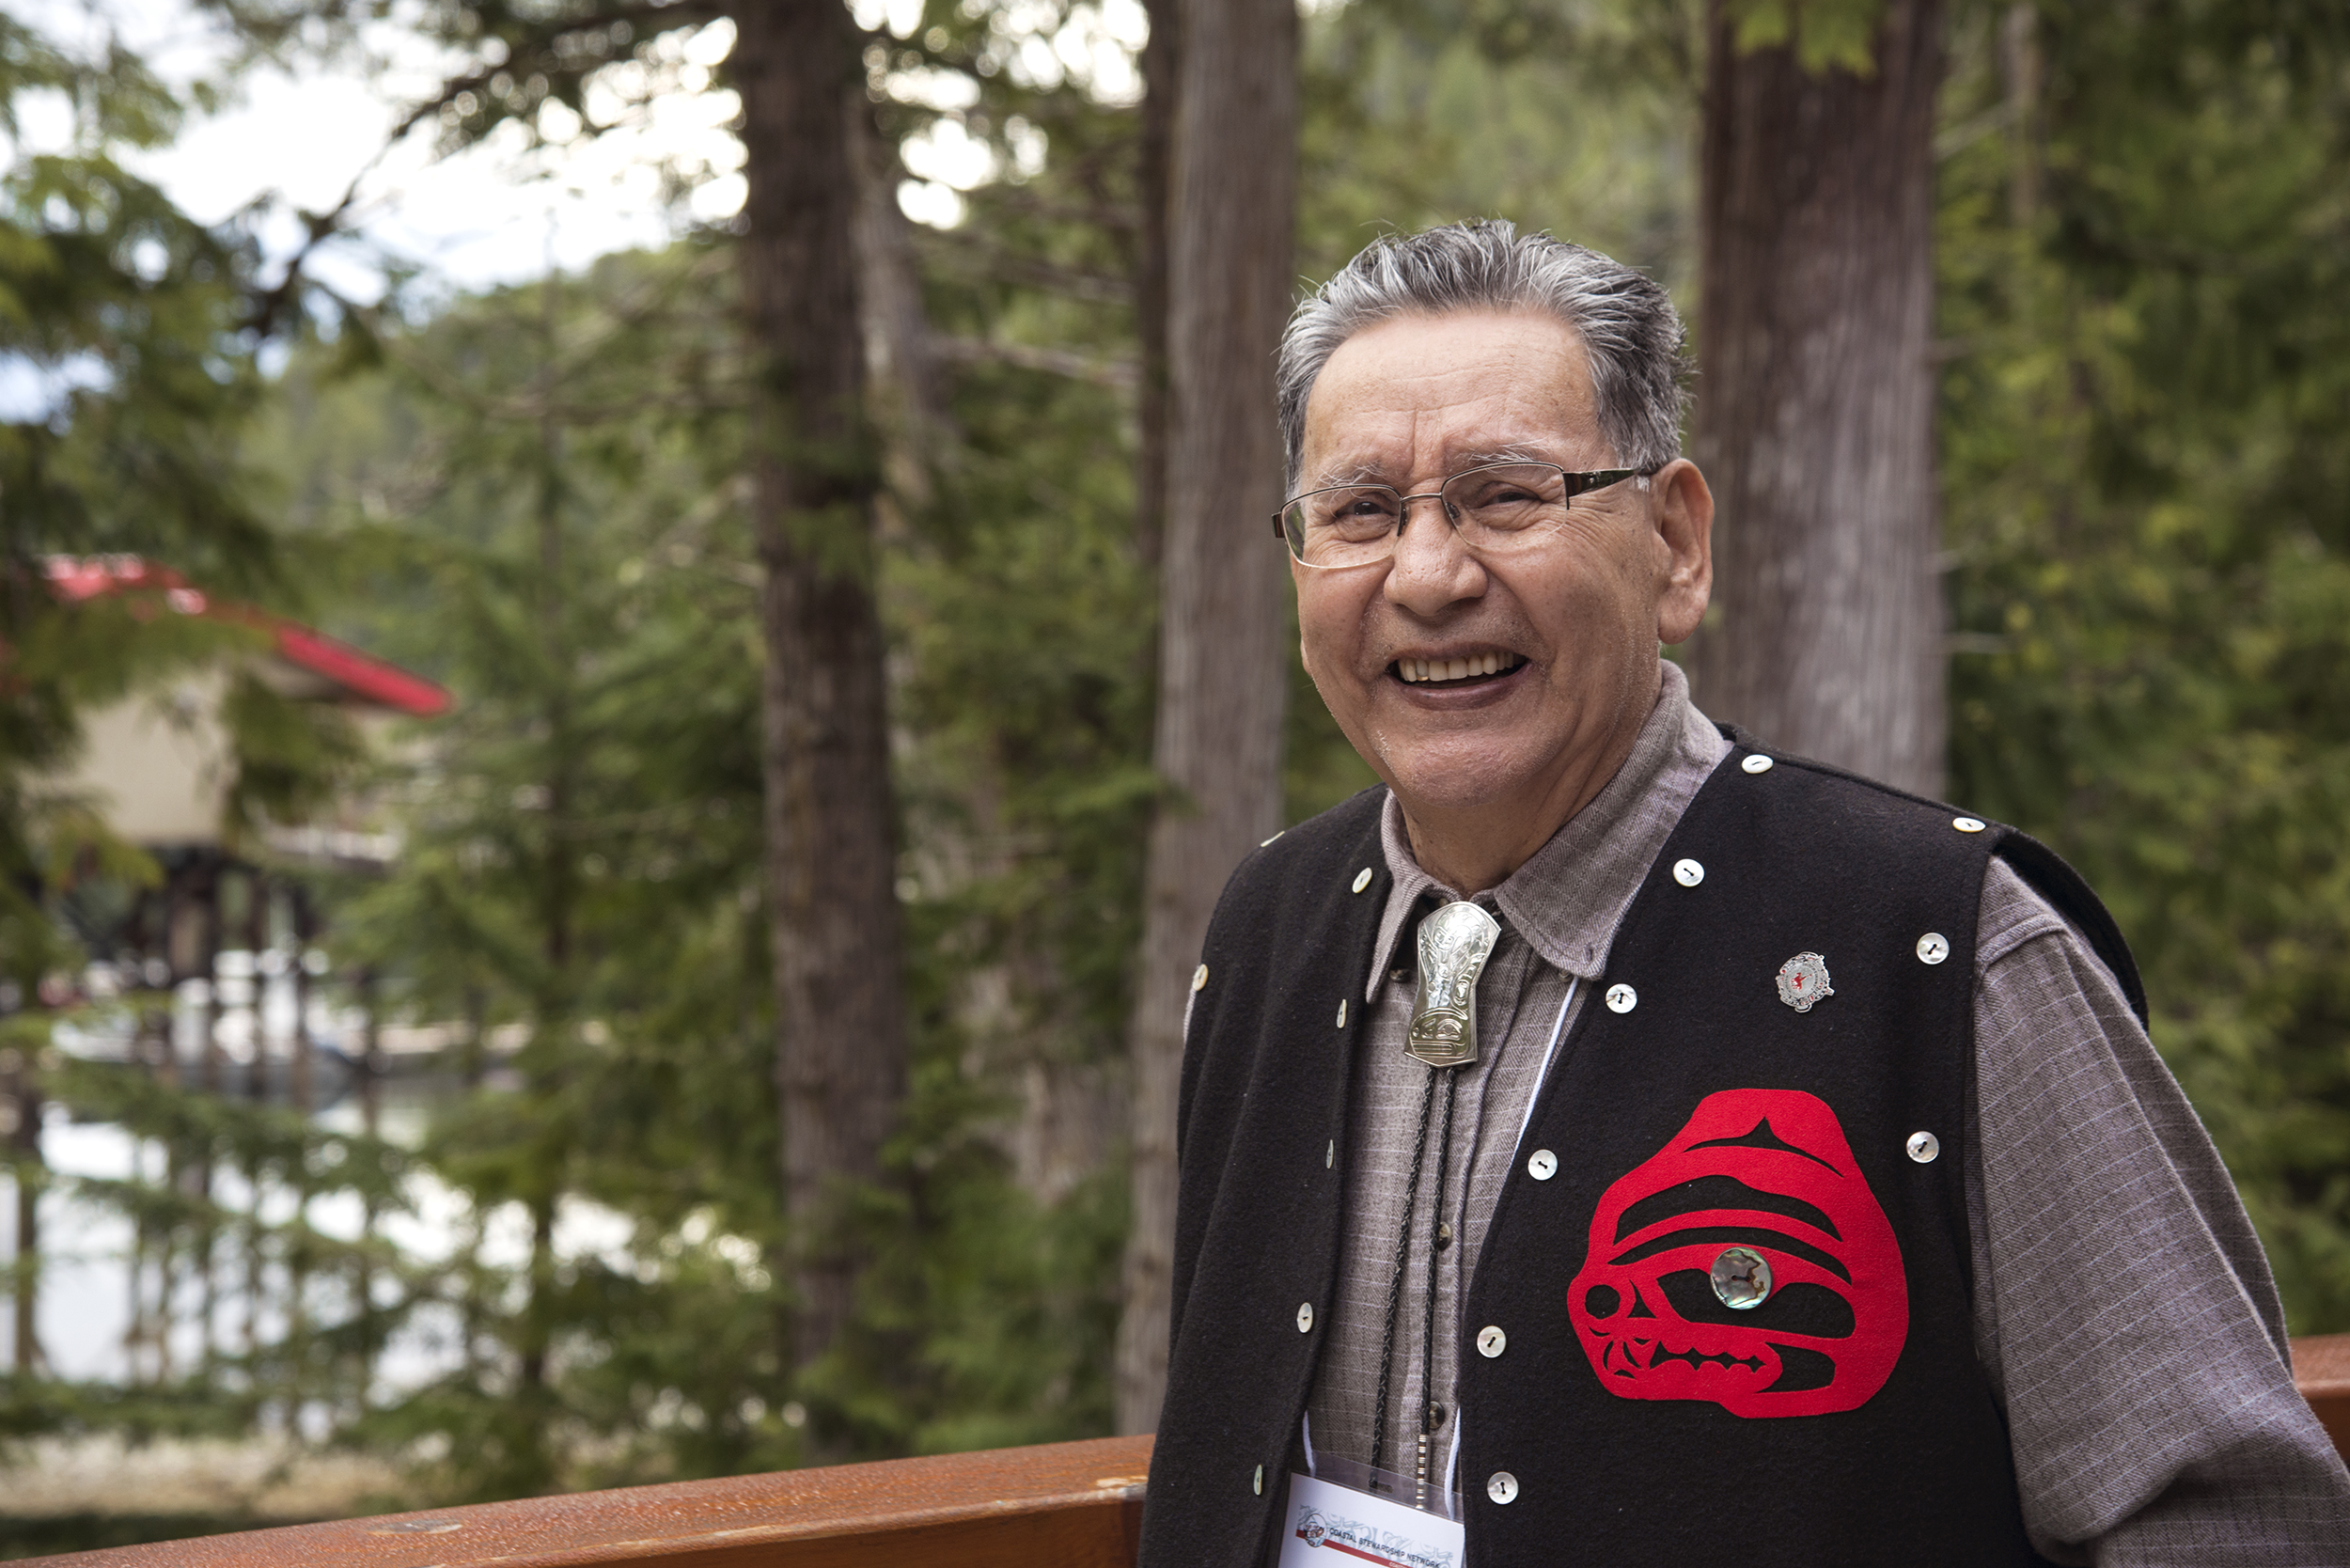 Elder Clarence Nelson from Metlakatla takes in the view from Calvert Island before the Coastal Stewardship Network meeting gets underway. Photo by Shanna Baker